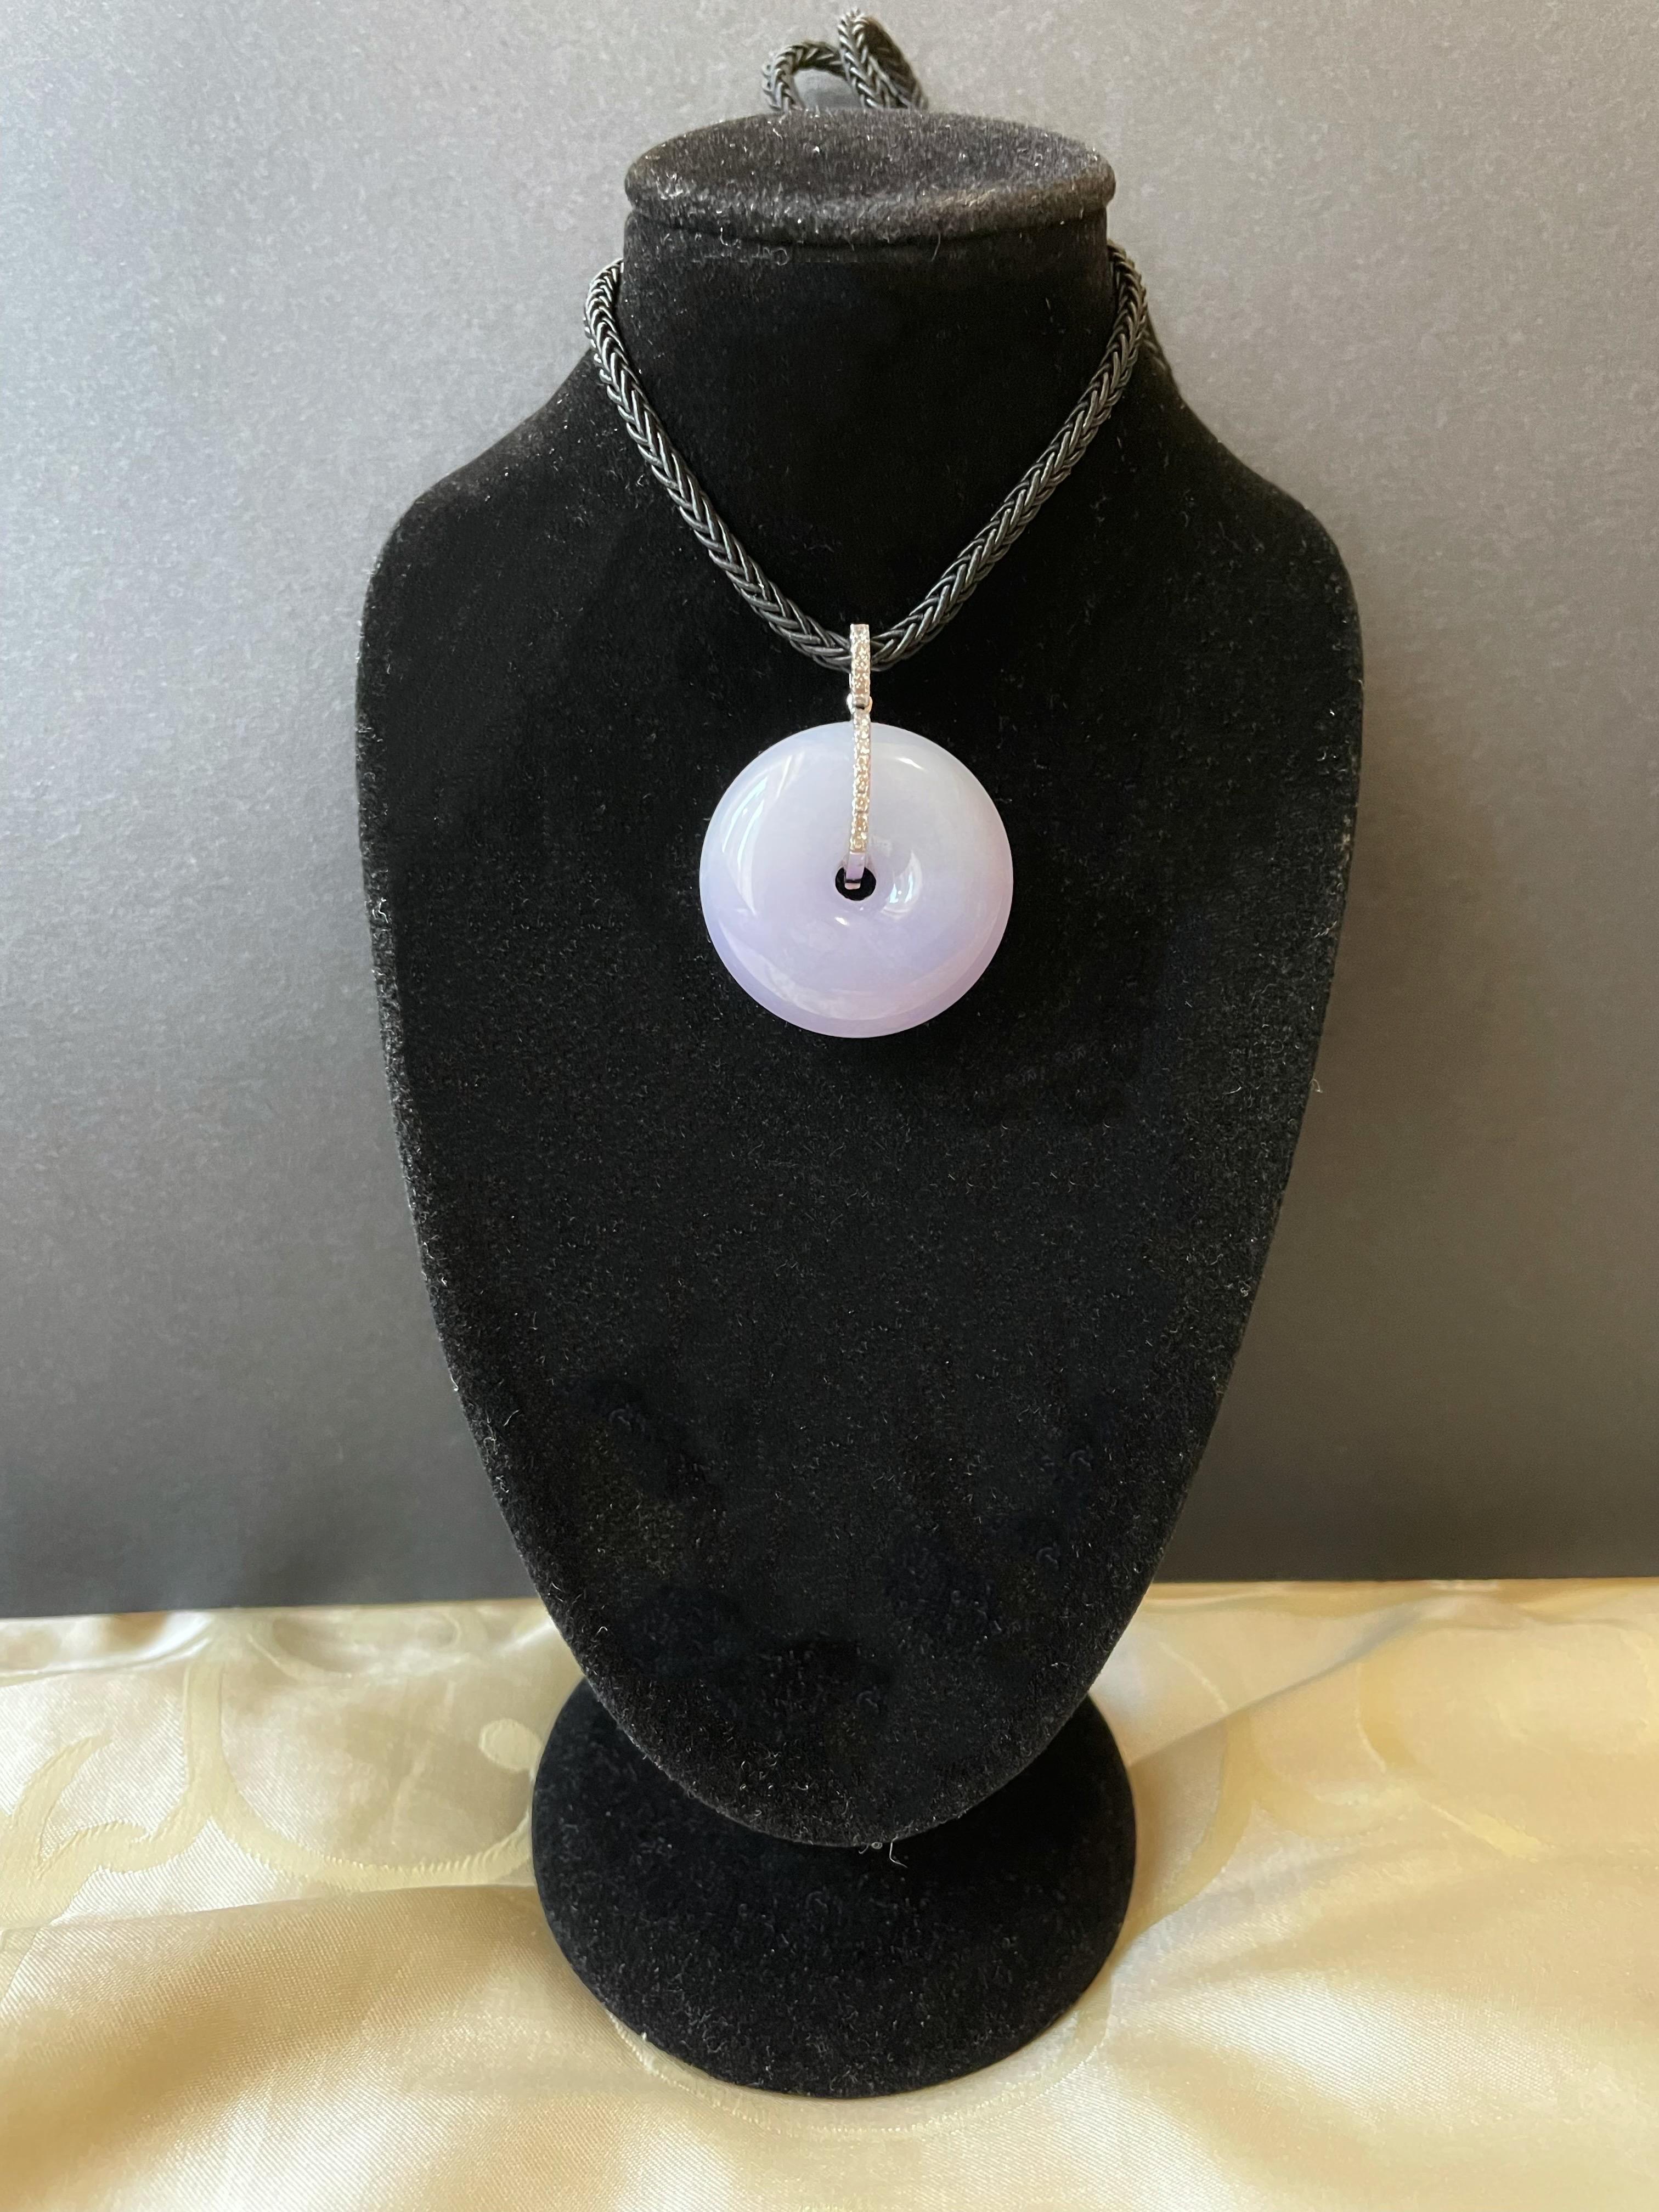 95.87 Ct - Natural Myanmar Lavender Icy Type Jadeite Donut Necklace For Sale 4